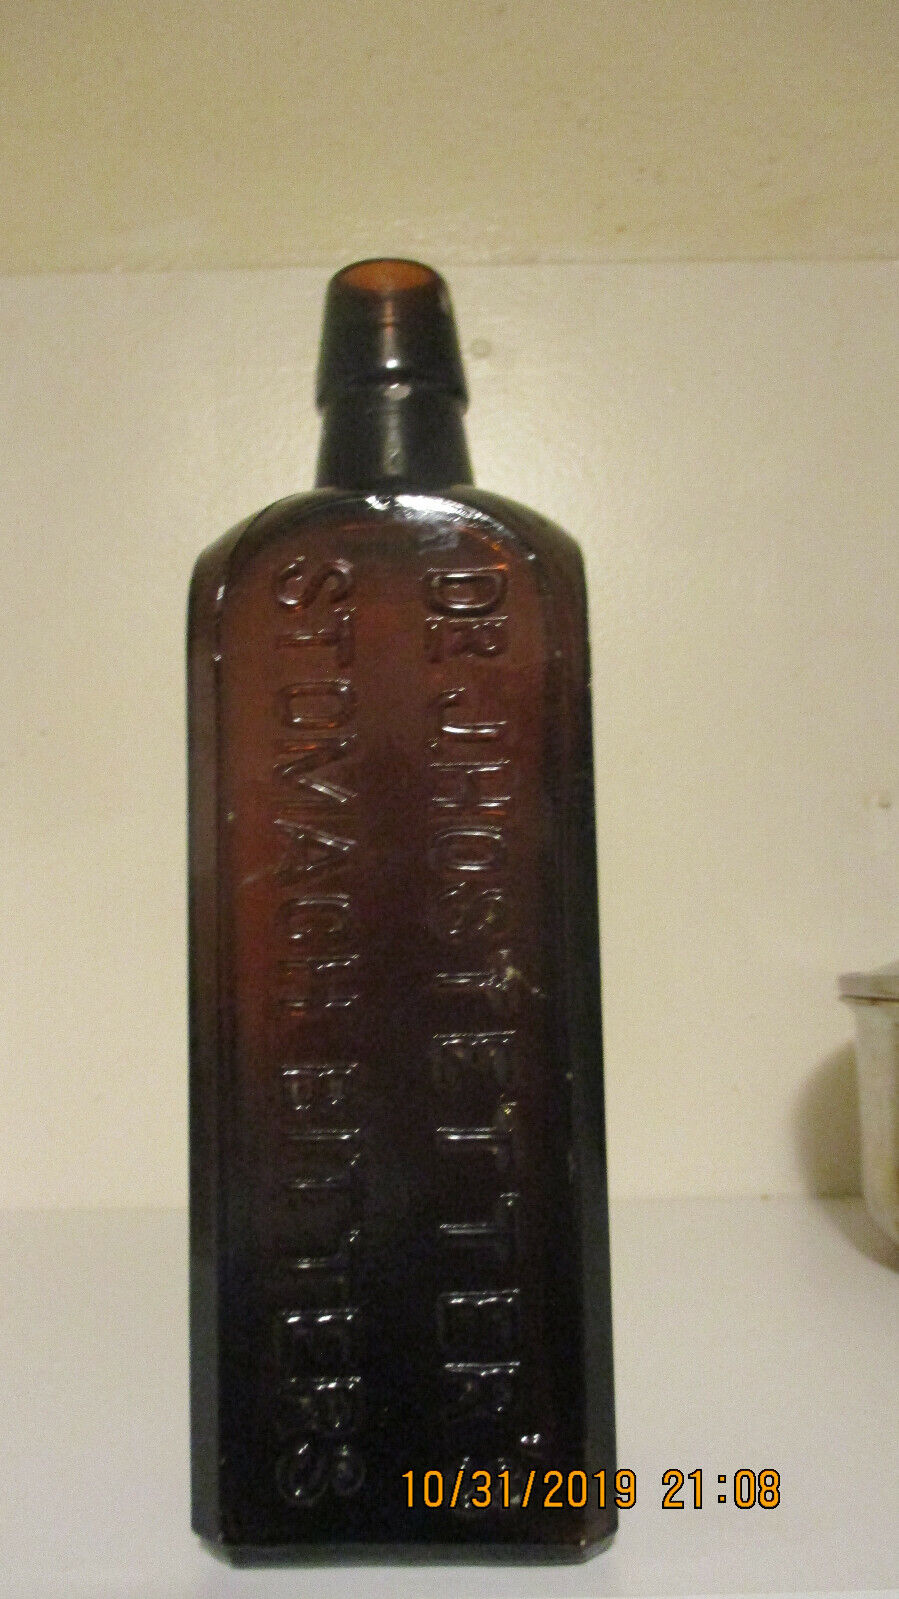 VERY OLD BOTTLE DUG UP IN THE HISTORIC :OLD WEST TOWN